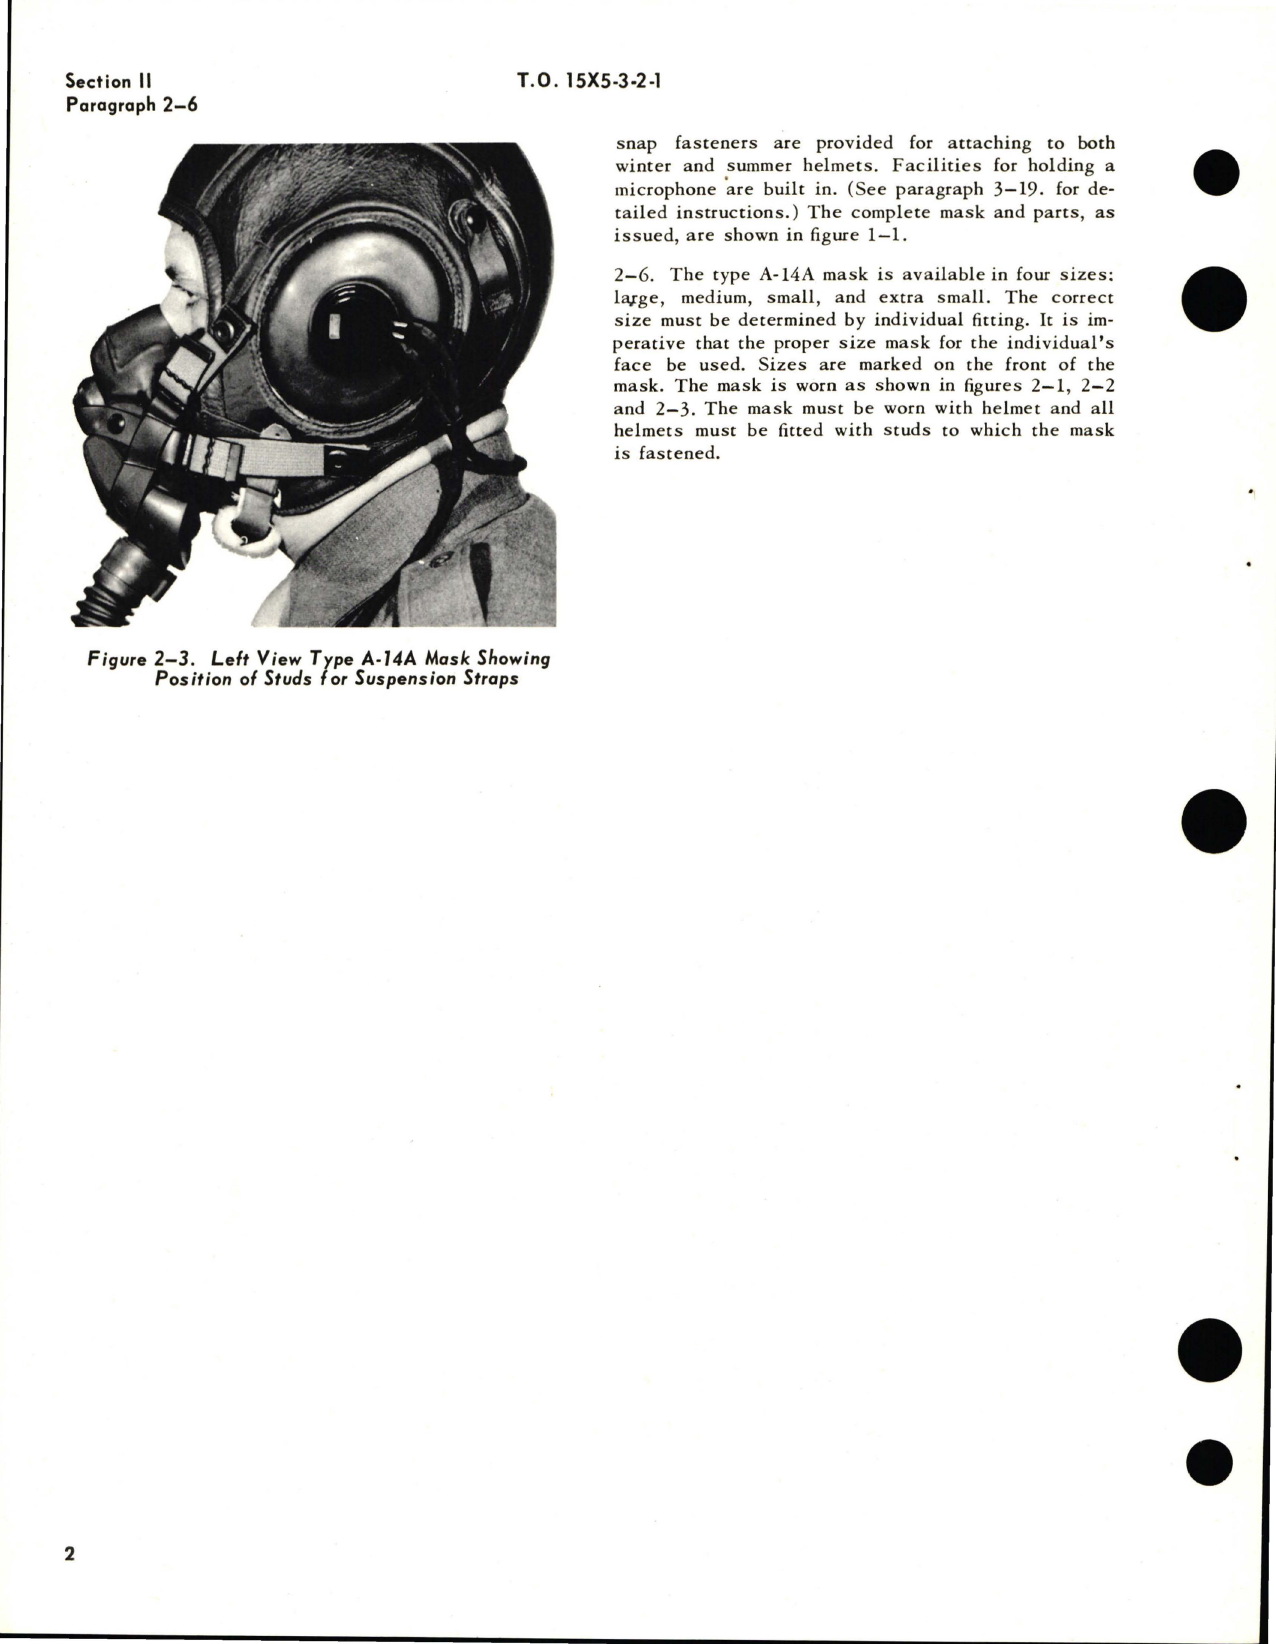 Sample page 6 from AirCorps Library document: Operation, Service and Overhaul Instructions with Illustrated Parts Breakdown for Demand Oxygen Mask - Type A-14A